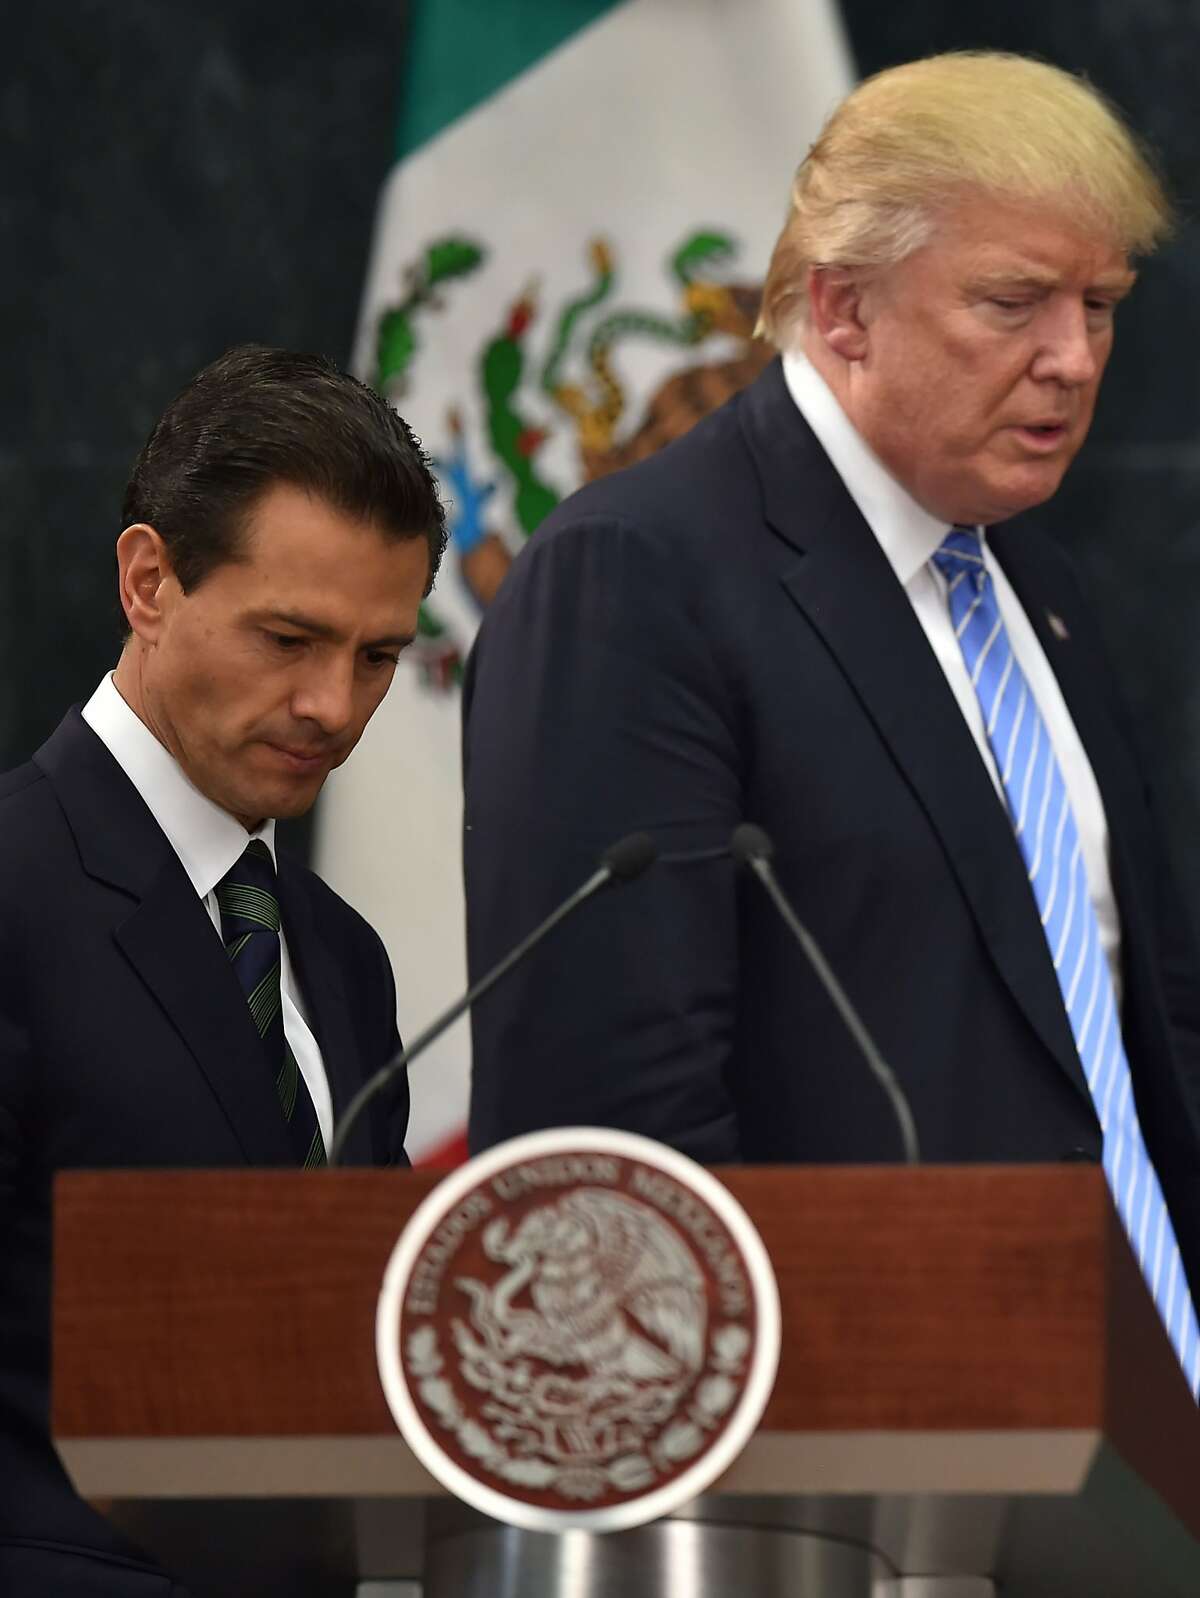 US presidential candidate Donald Trump (R) and Mexican President Enrique Pena Nieto prepare to deliver a joint press conference in Mexico City on August 31, 2016. Donald Trump was expected in Mexico Wednesday to meet its president, in a move aimed at showing that despite the Republican White House hopeful's hardline opposition to illegal immigration he is no close-minded xenophobe. Trump stunned the political establishment when he announced late Tuesday that he was making the surprise trip south of the border to meet with President Enrique Pena Nieto, a sharp Trump critic. / AFP PHOTO / YURI CORTEZYURI CORTEZ/AFP/Getty Images